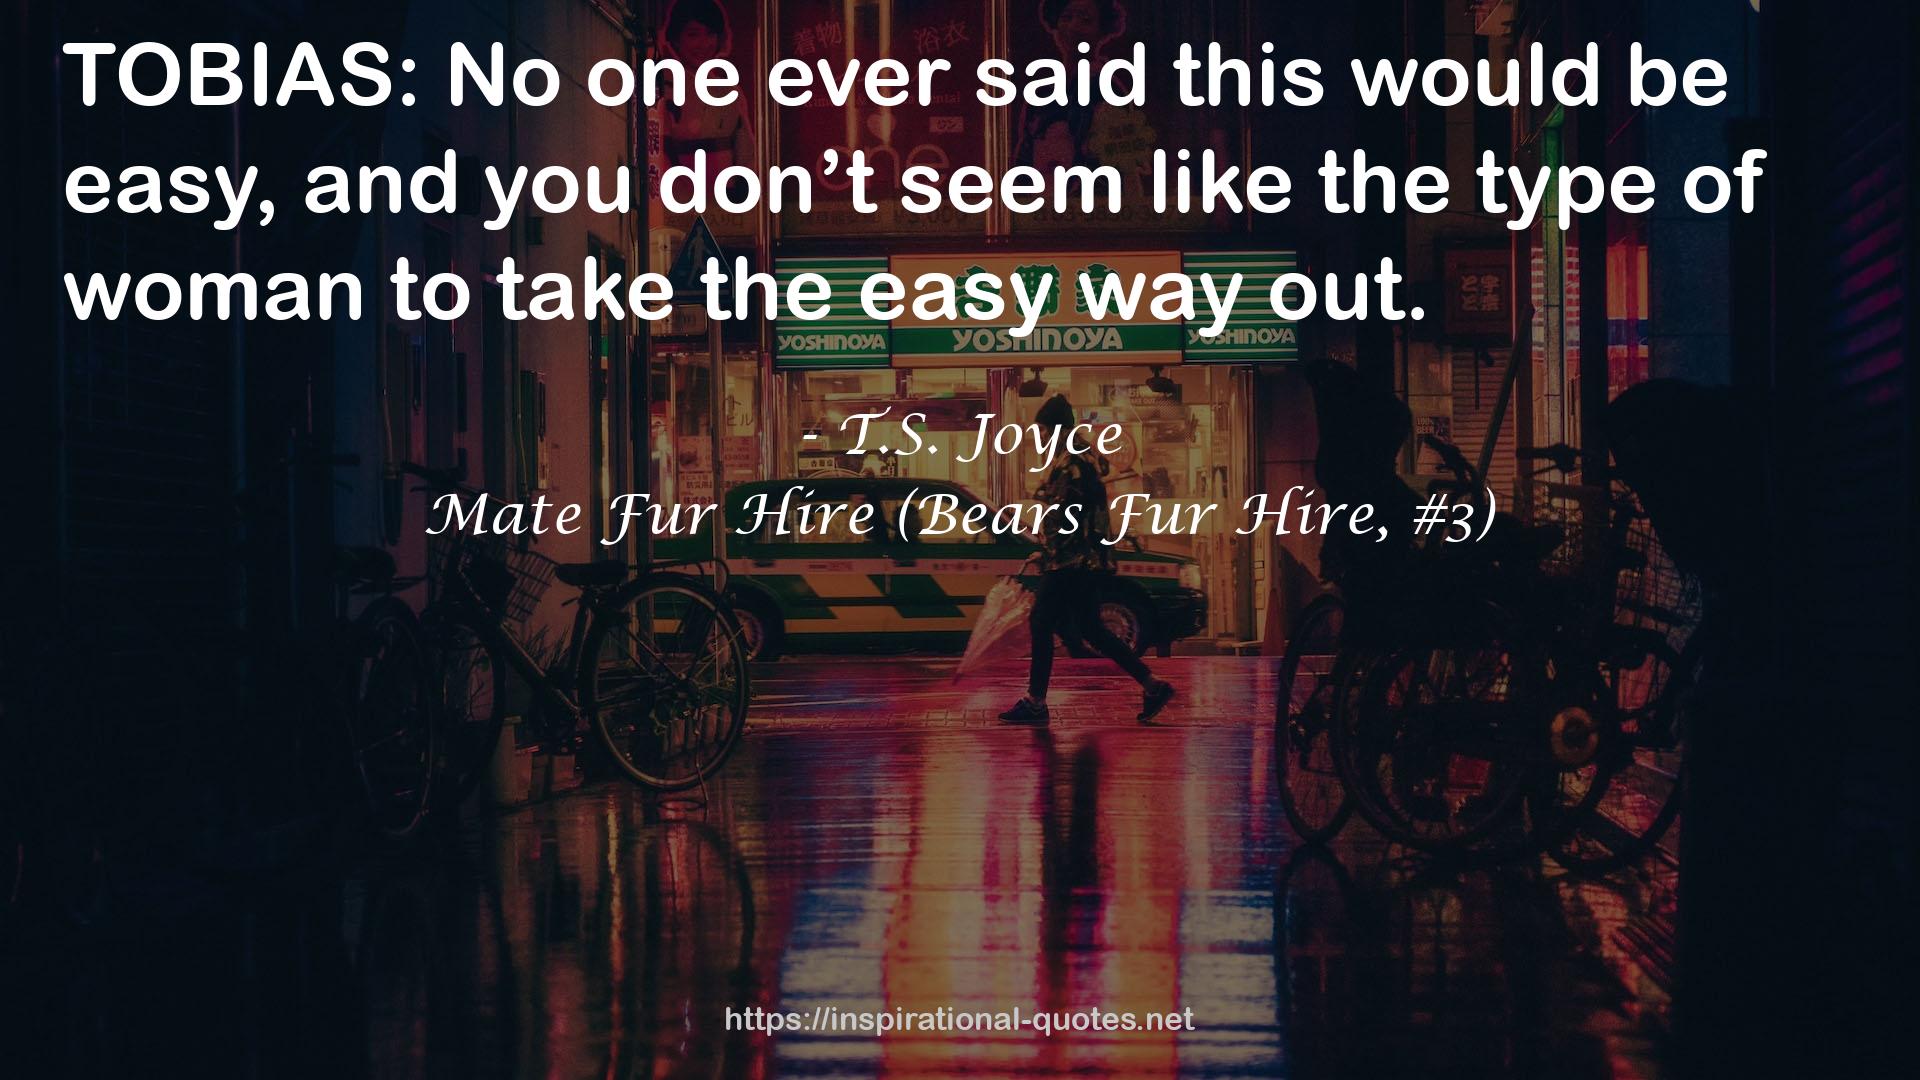 Mate Fur Hire (Bears Fur Hire, #3) QUOTES